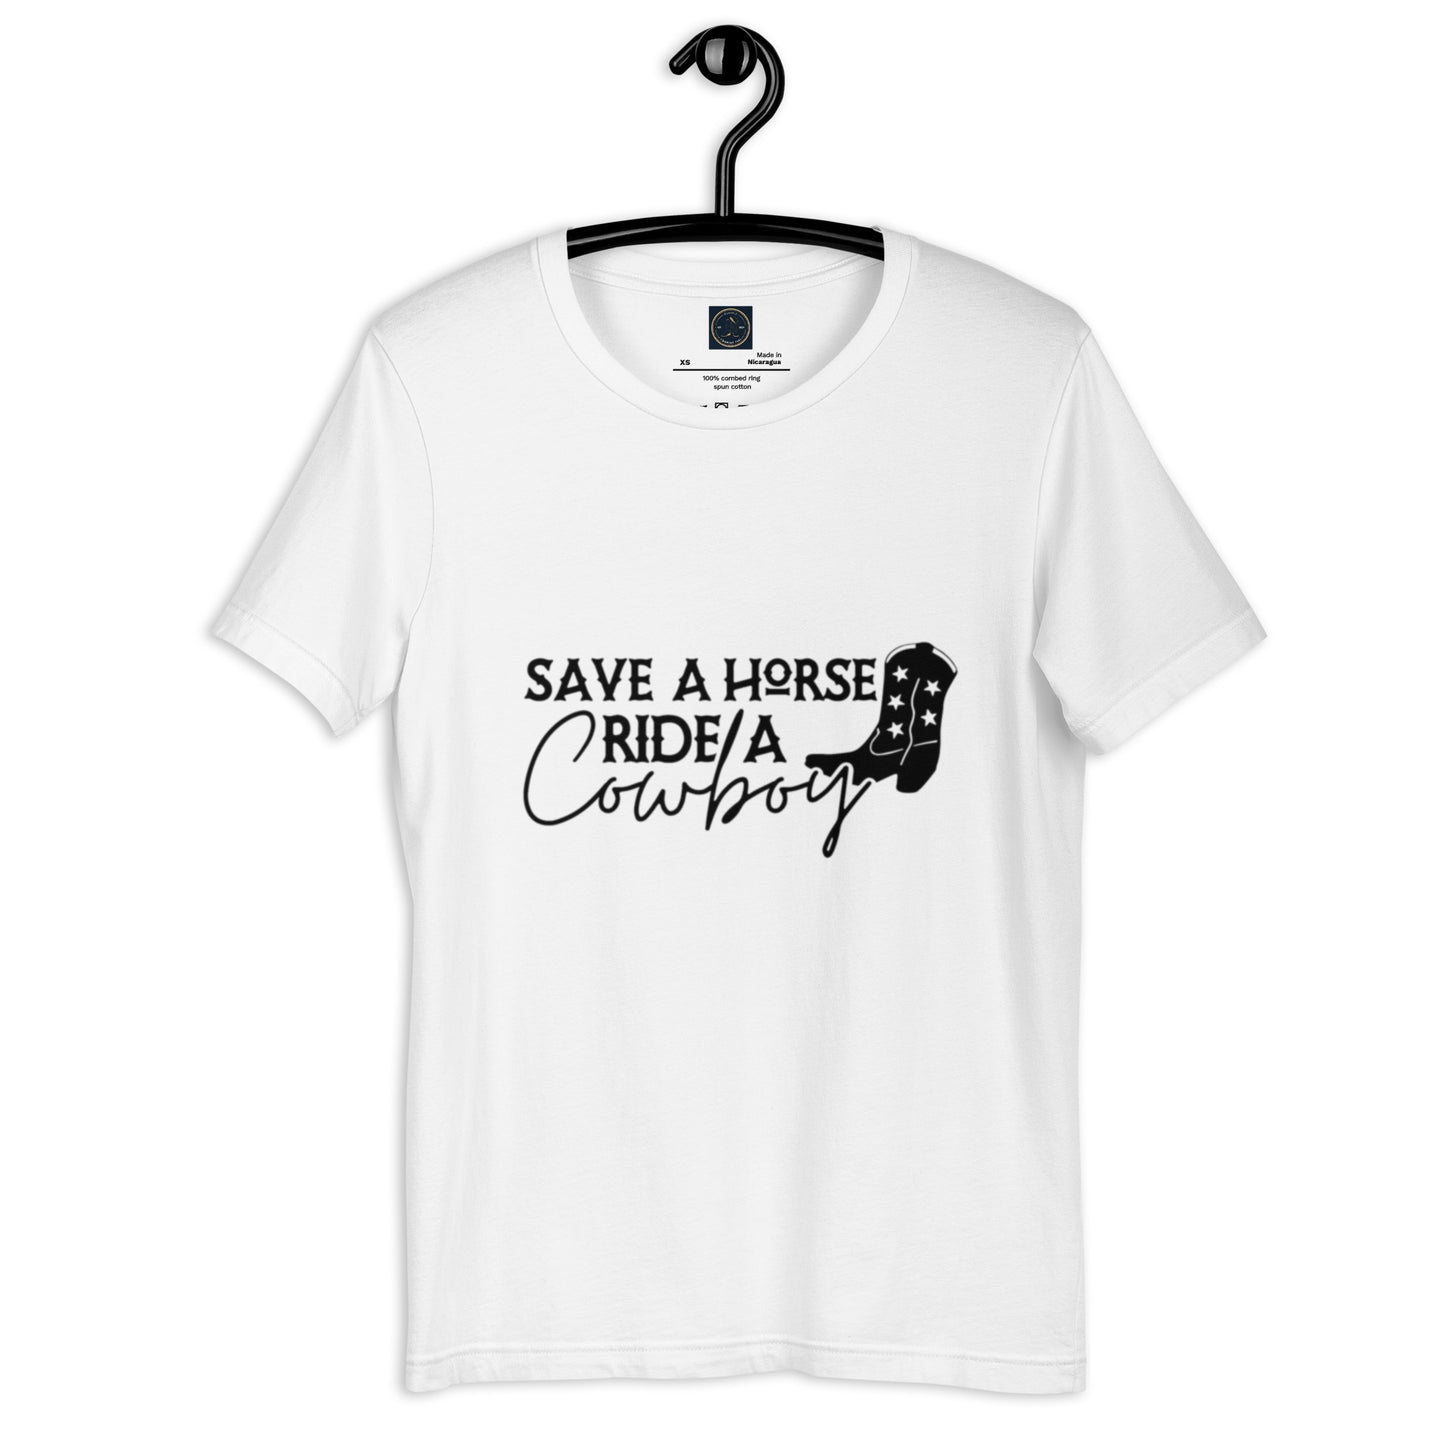 Save a Horse - Classic Country Tees